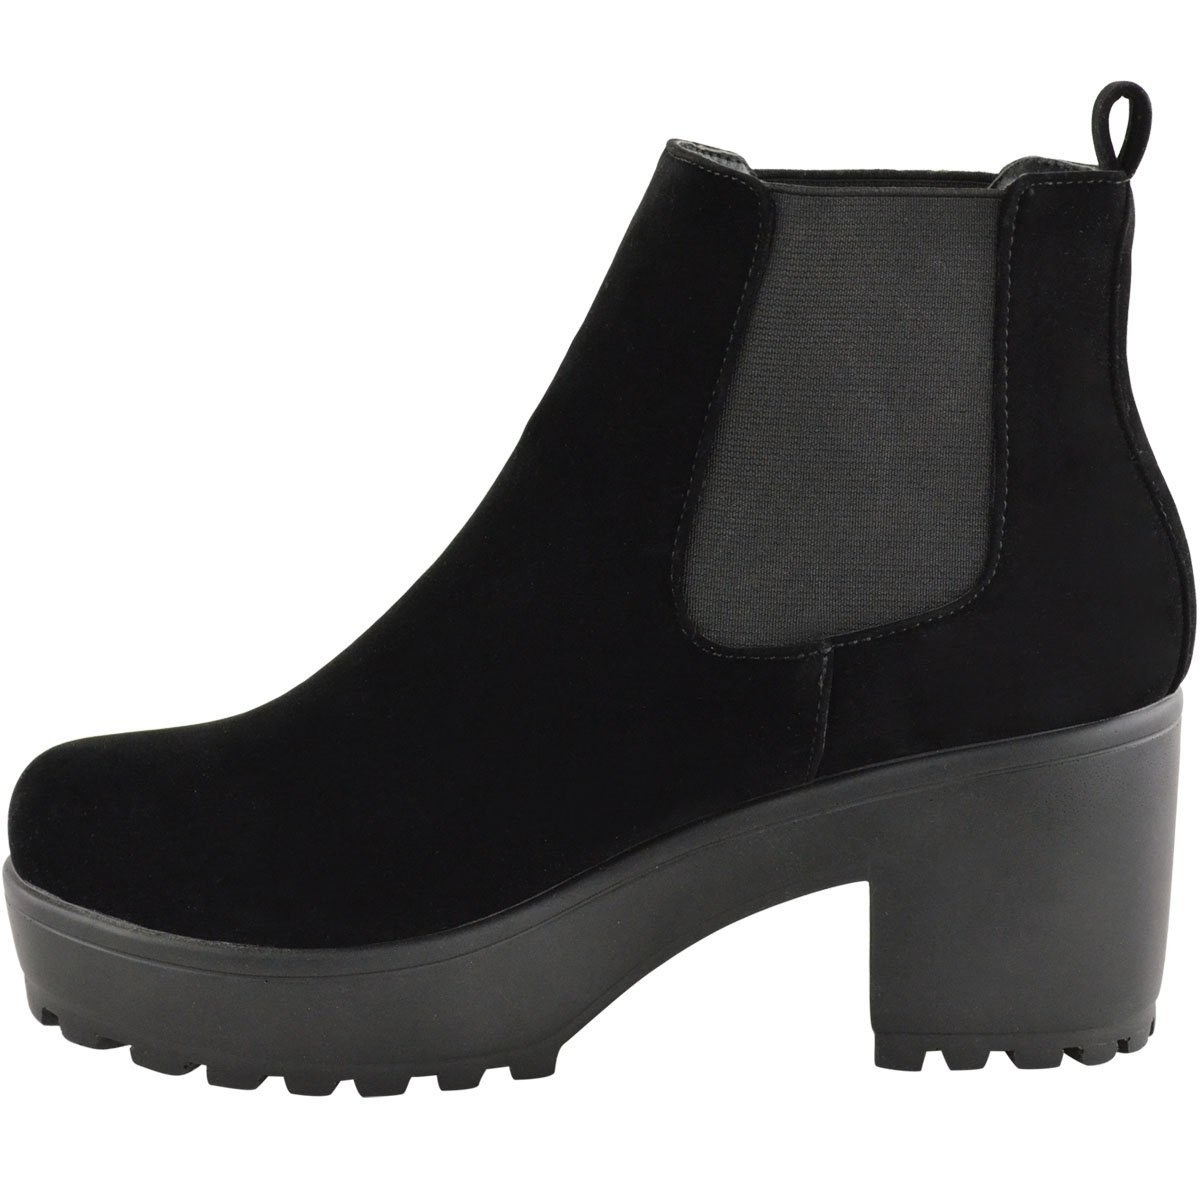 20 Of The Best Chelsea Boots You Can Get On Amazon